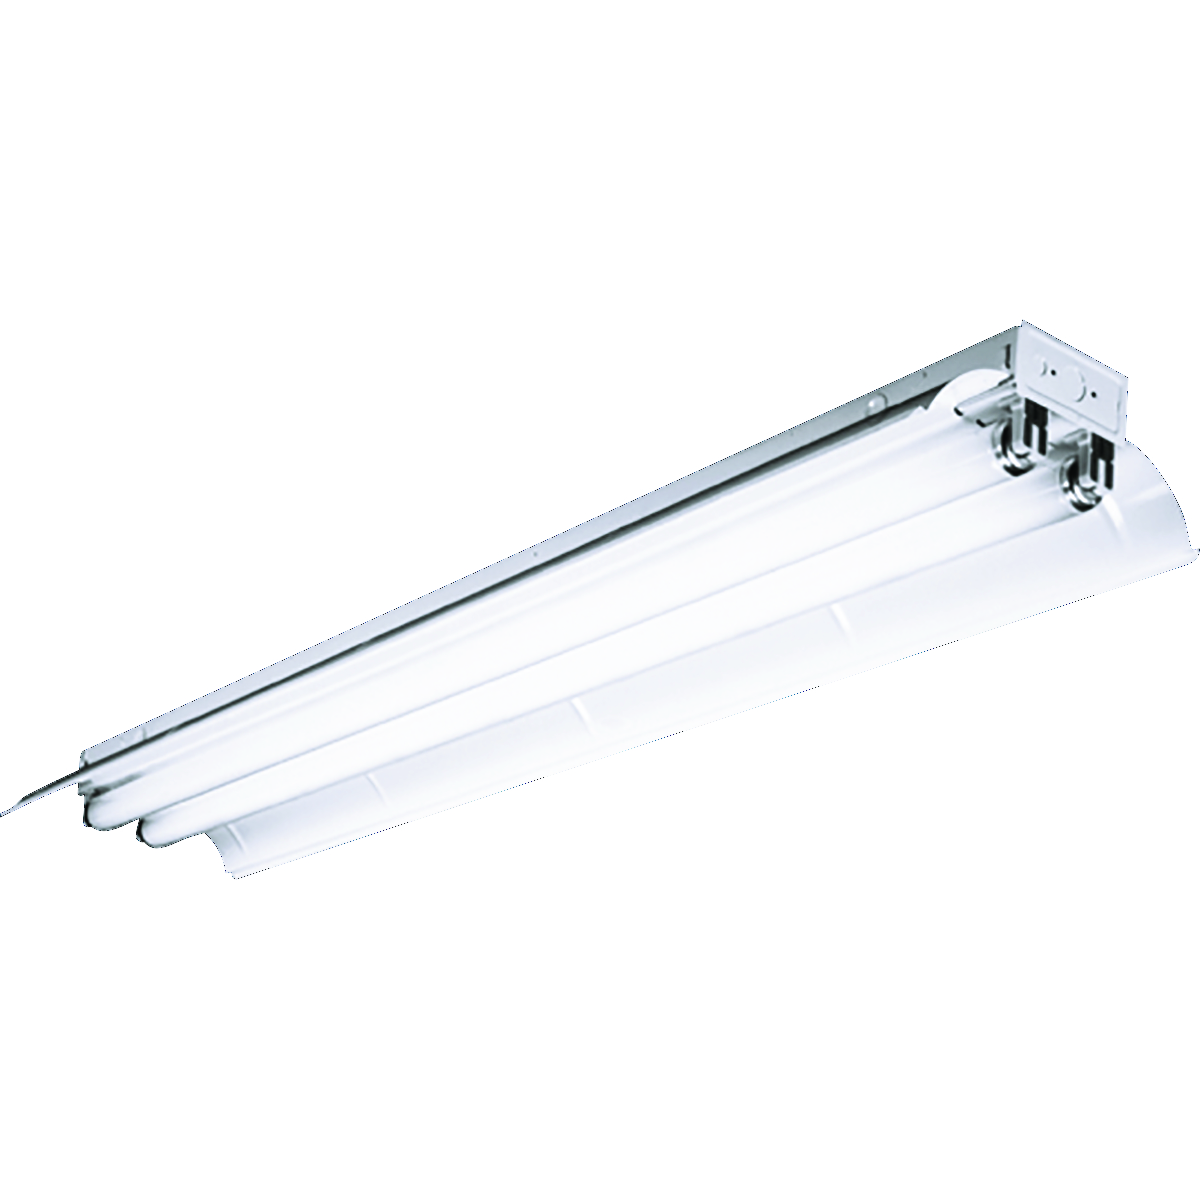 CSR, 4 ft, Number of Lamps: 2, Lamp Type: 4 foot, T8: 32 watt fluorescent, Lamp Included: No, Ballast Type: Electronic instant start T8, Voltage Rating: 120-277 VAC.